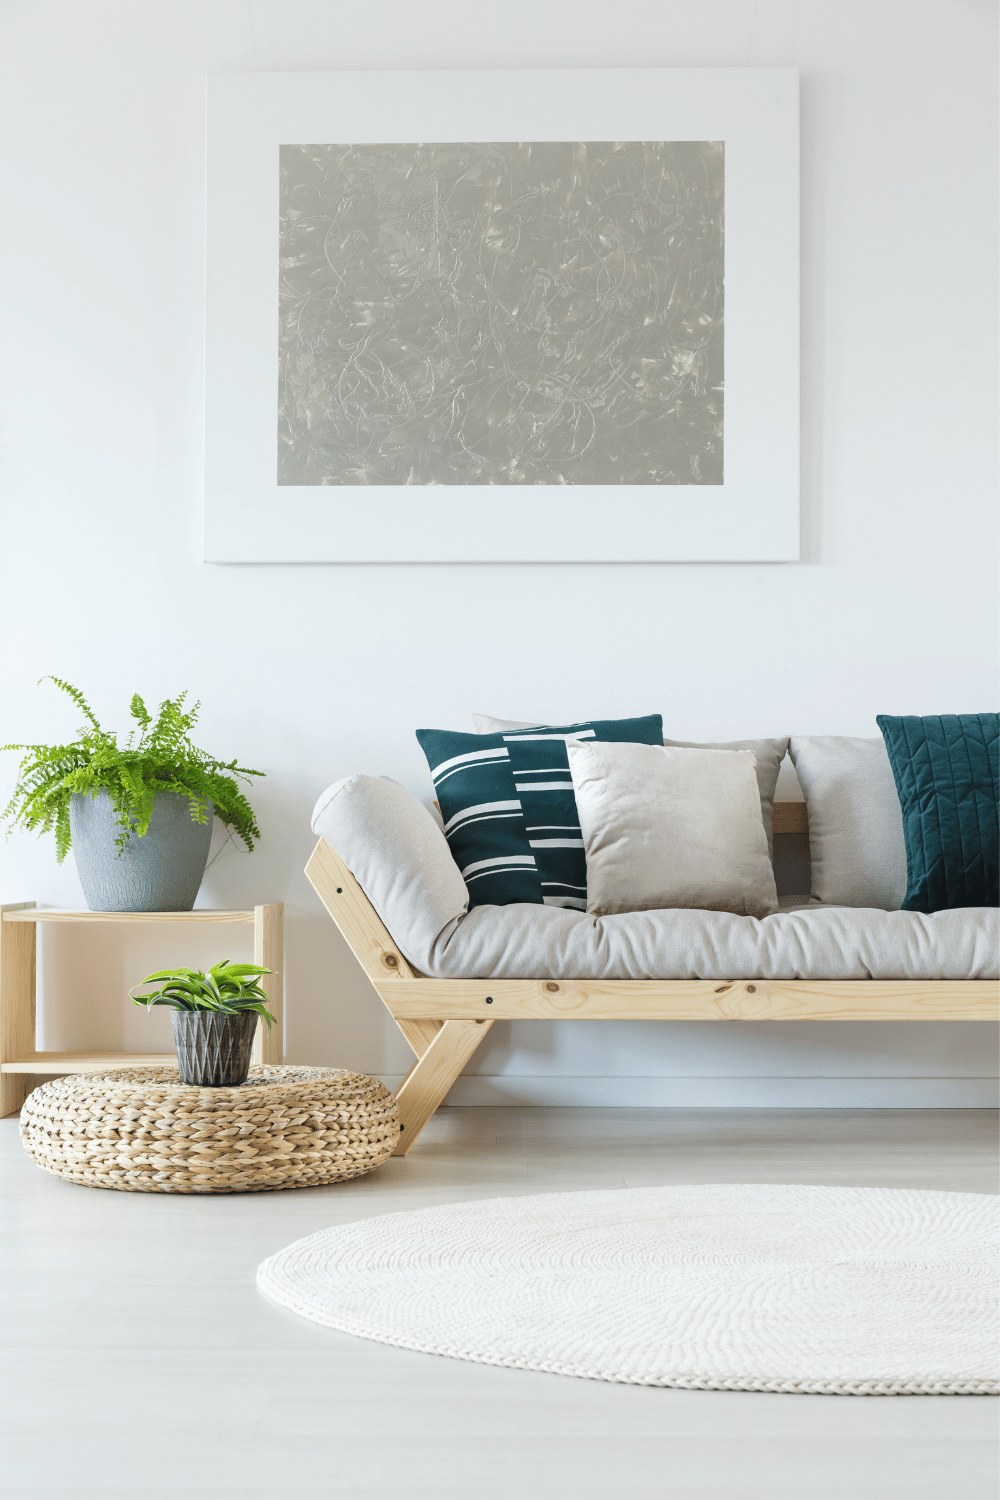 5 Decor Purchases To Help Improve Your Wellbeing